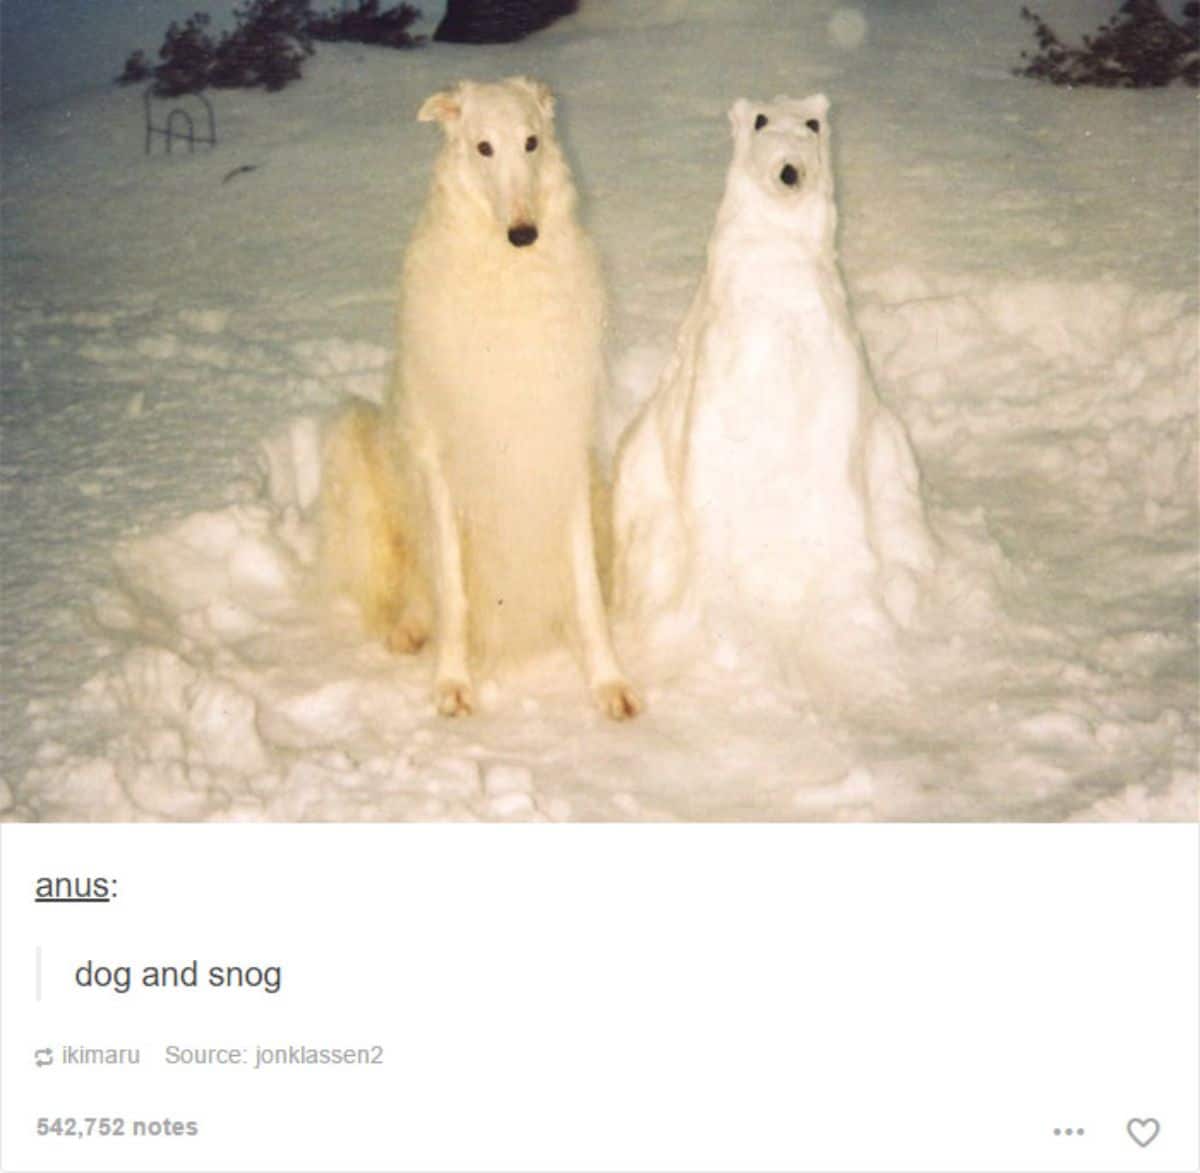 tumblr post of a tall white dog sitting in snow next to a snowdog and caption saying dog and snog